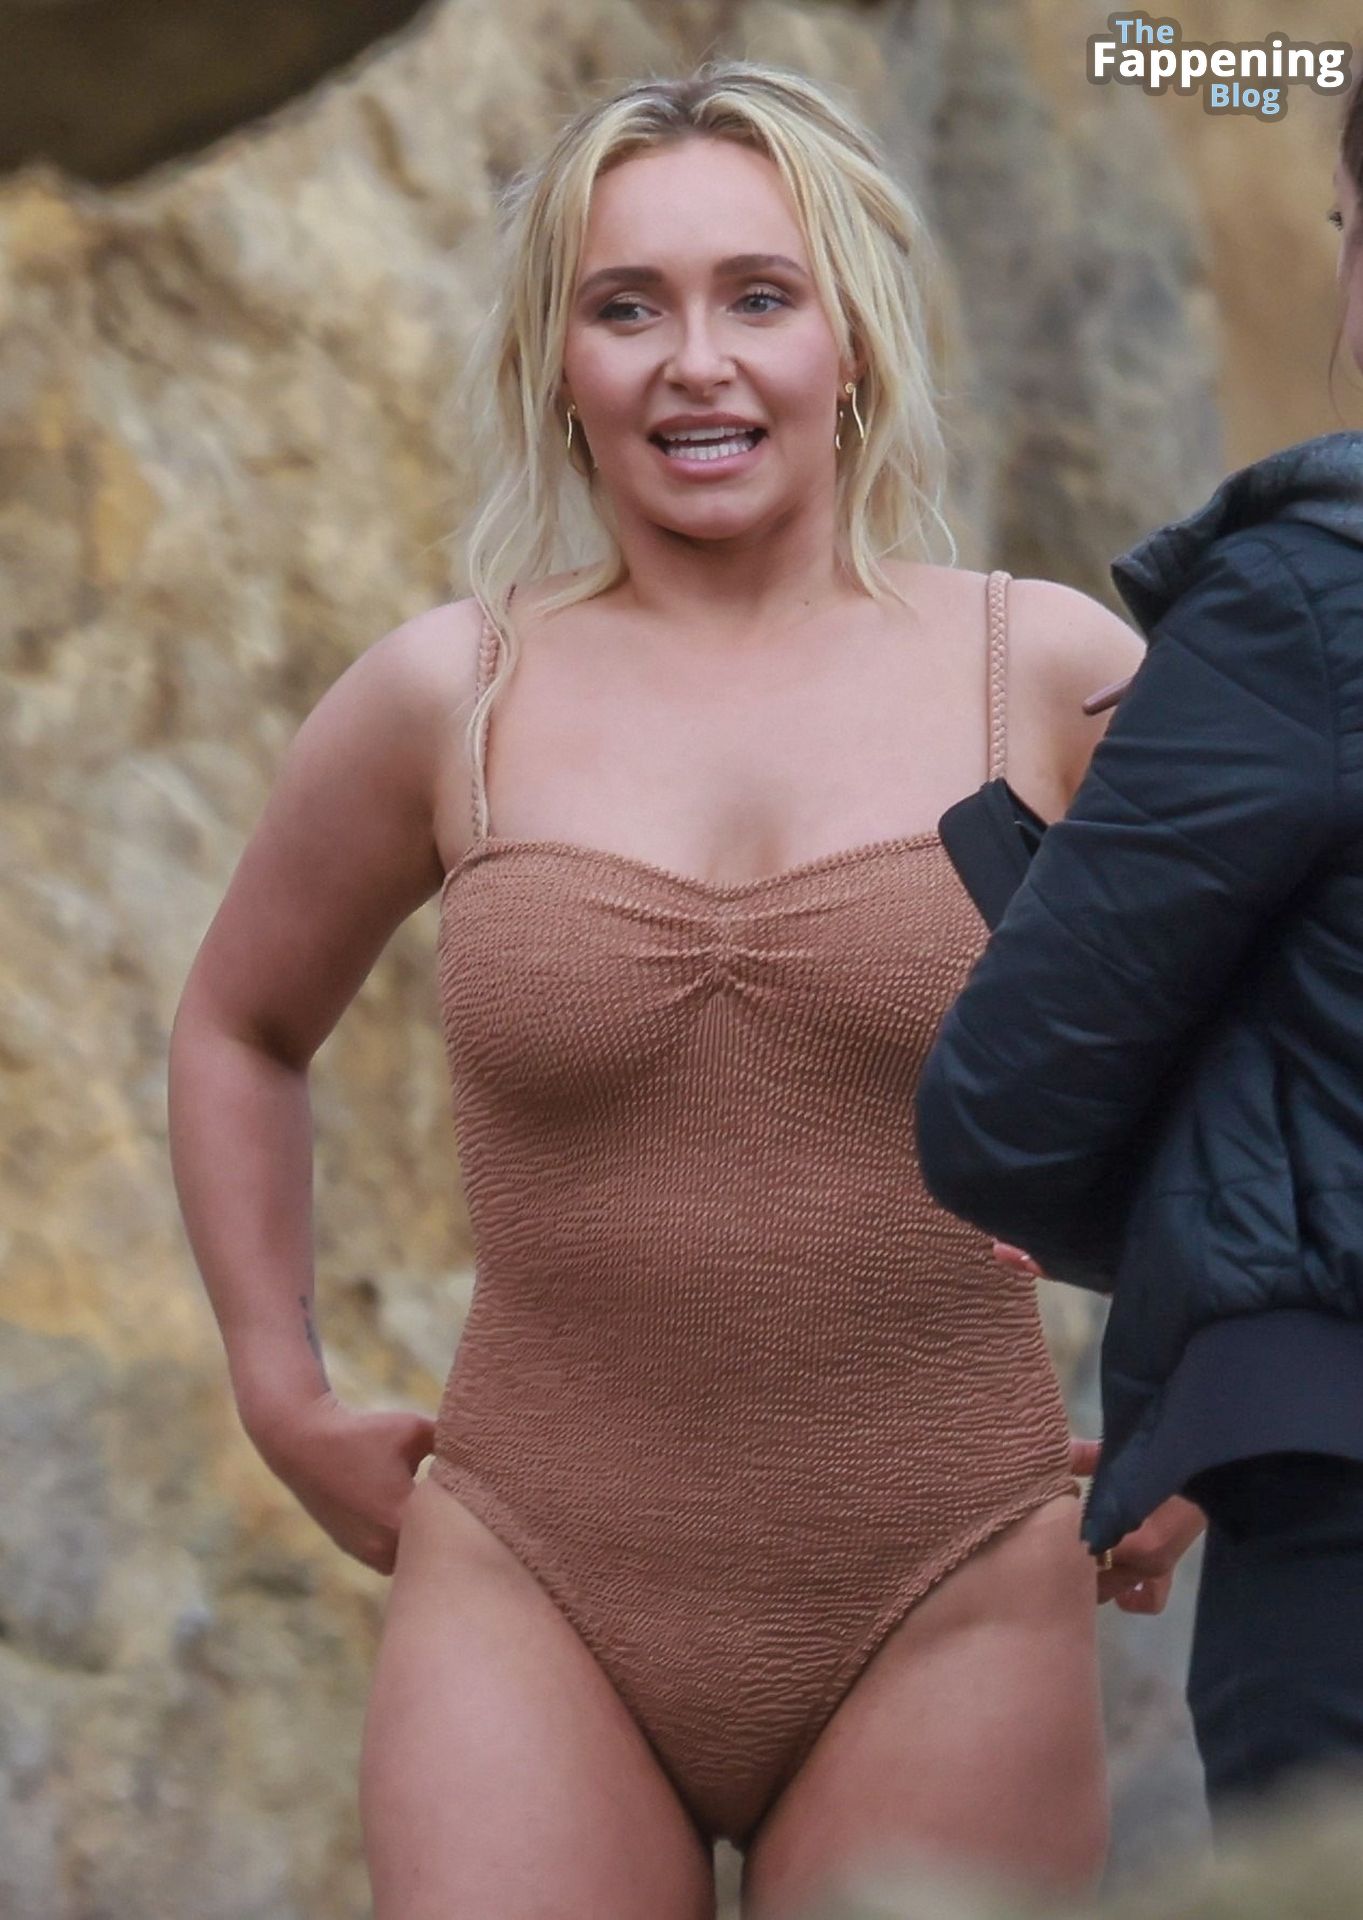 Hayden-Panettiere-Sexy-The-Fappening-Blog-67.jpg